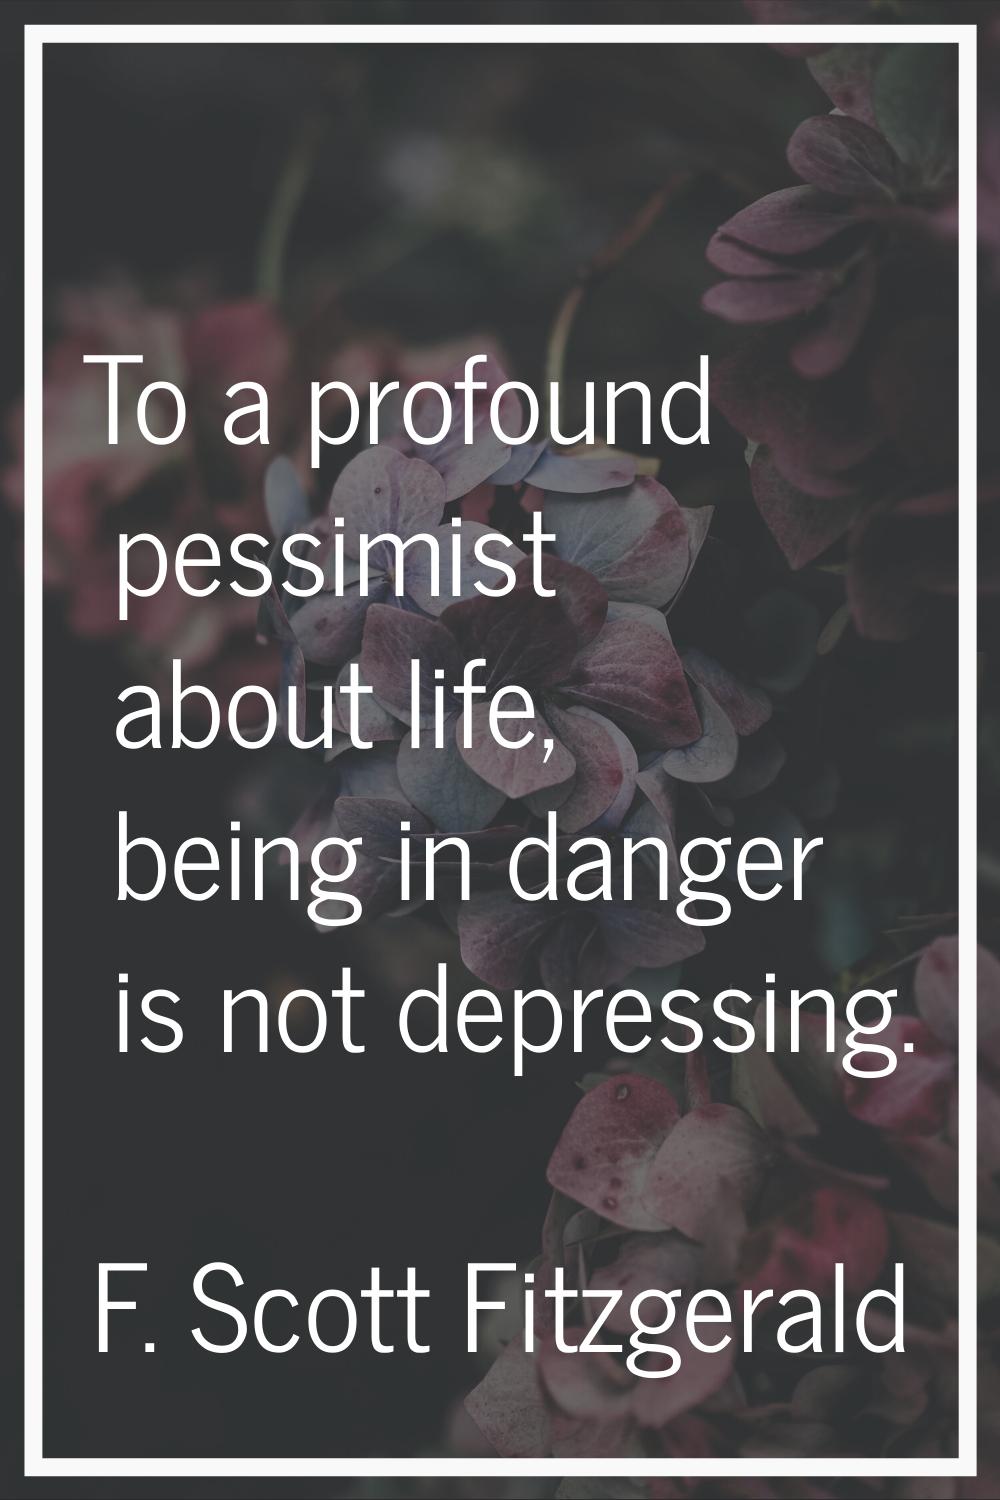 To a profound pessimist about life, being in danger is not depressing.